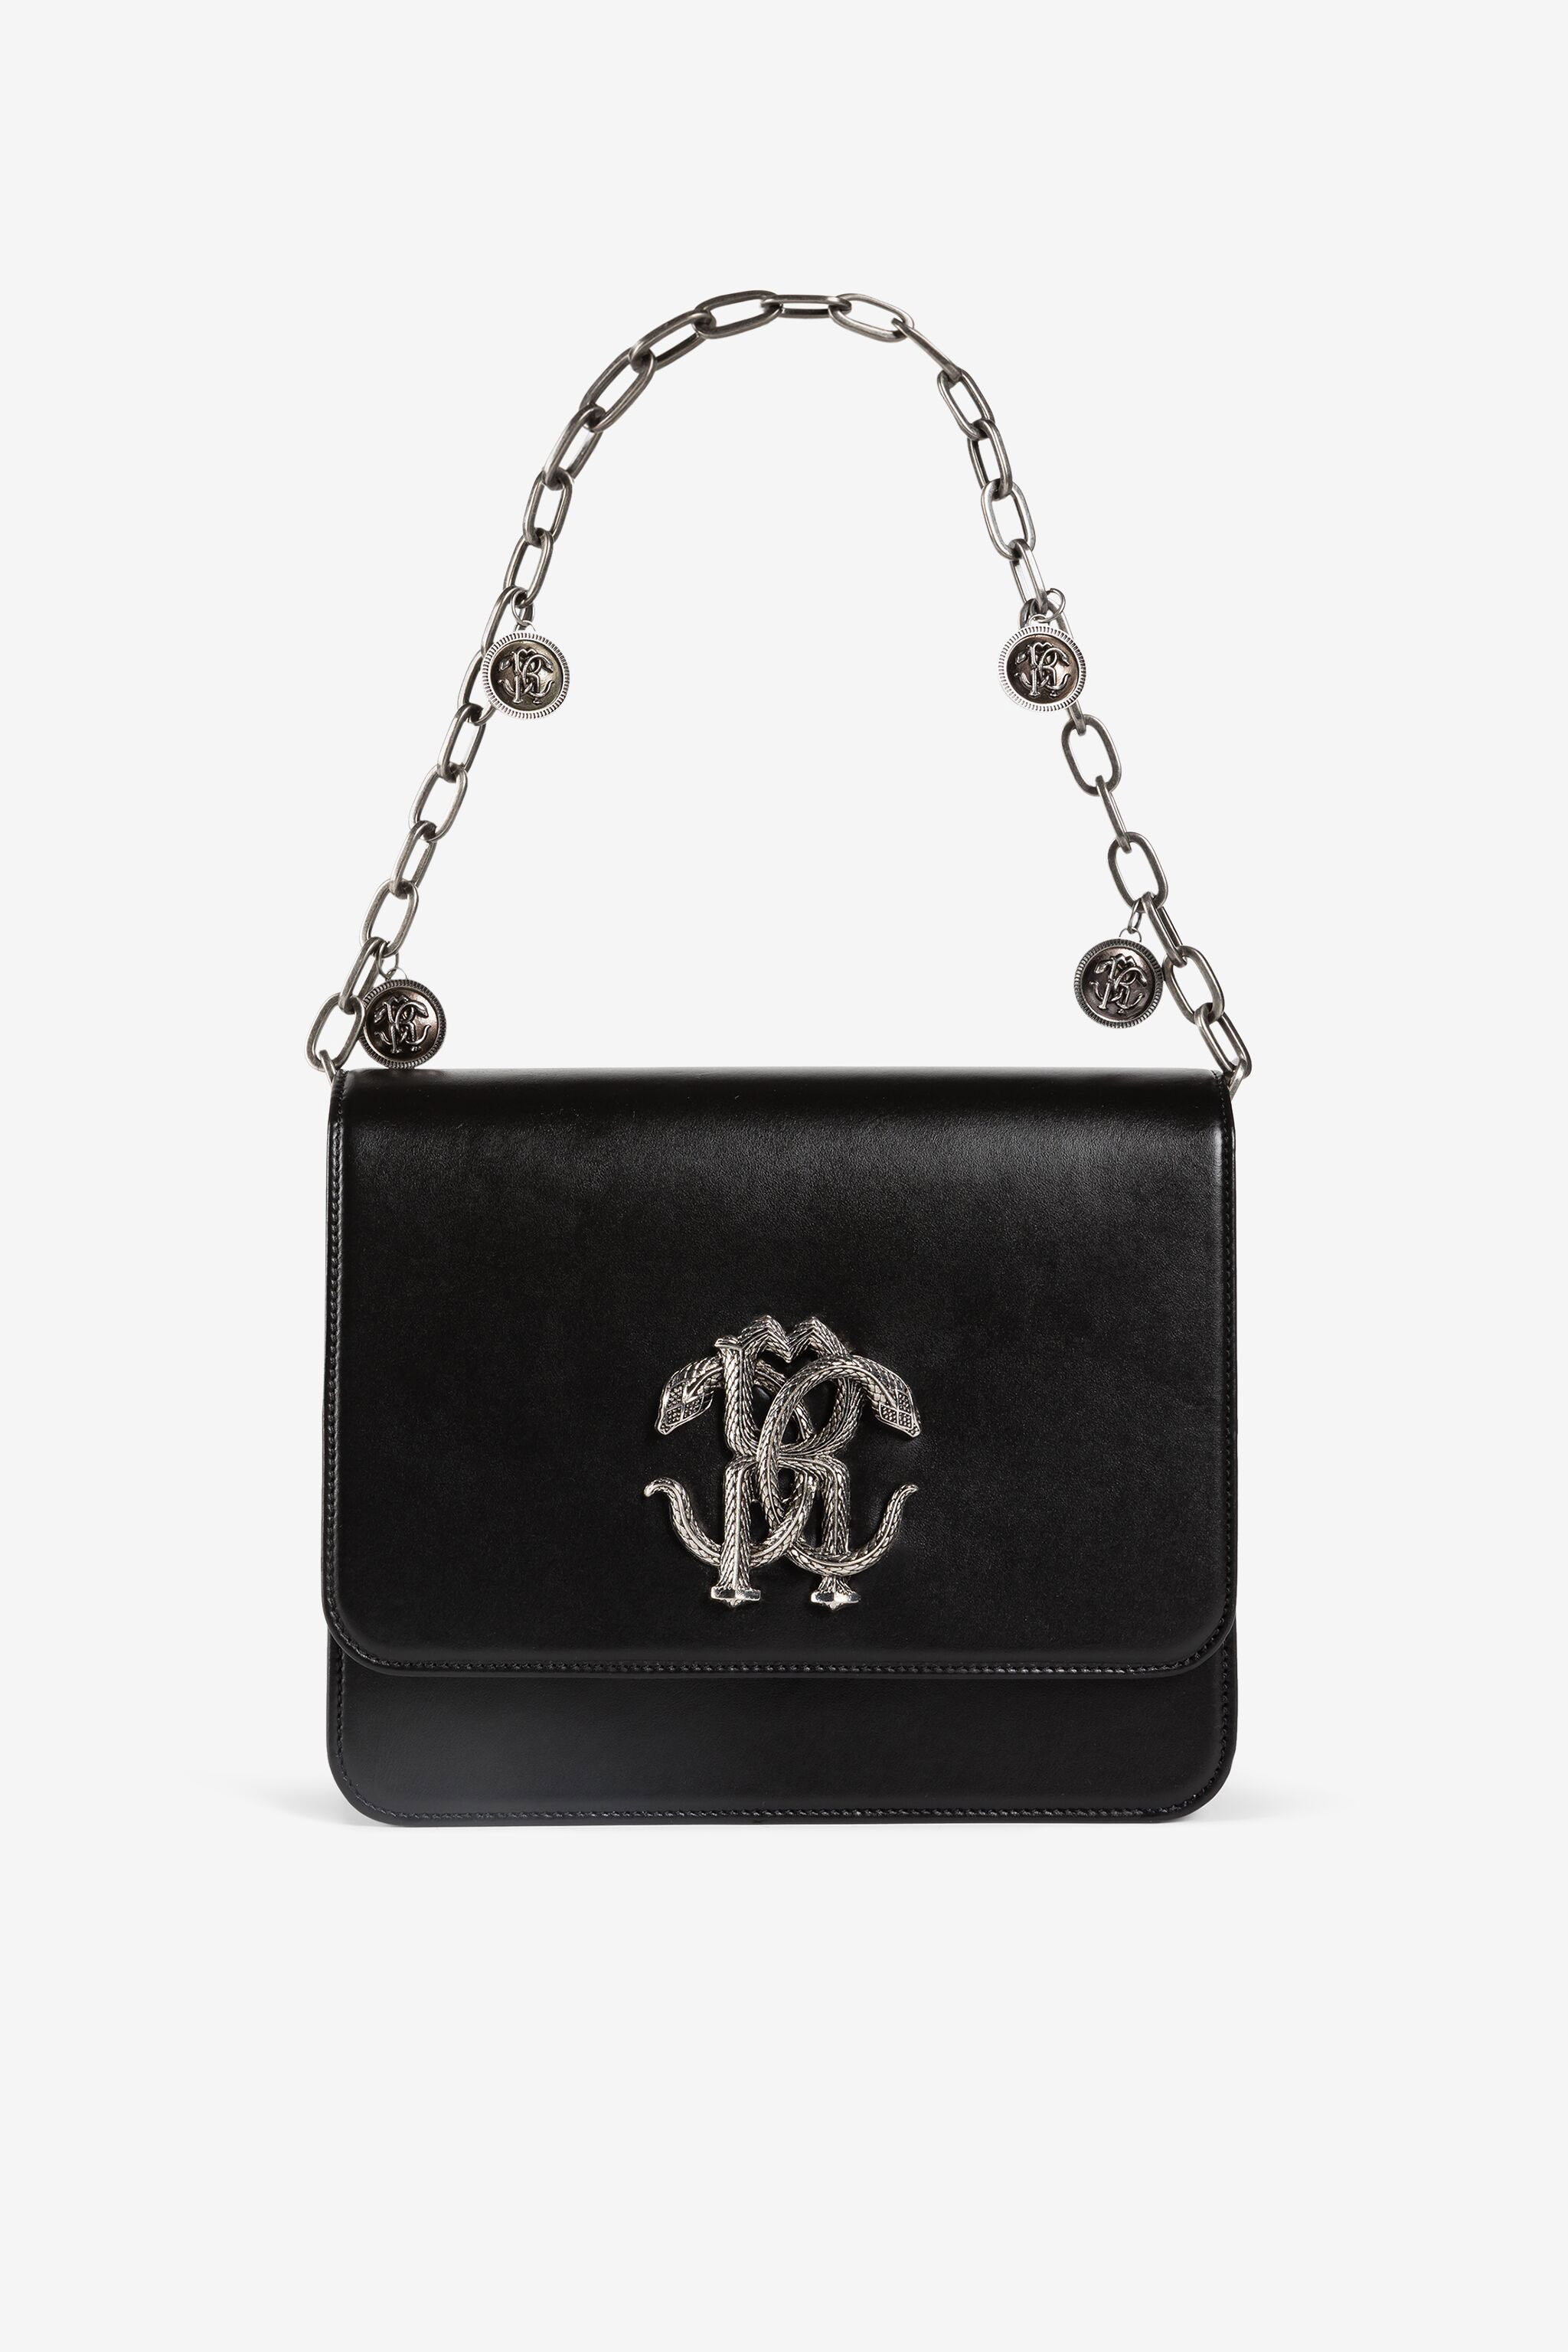 Roberto Cavalli Black Leather Shoulder Bag – Luxe Marché India